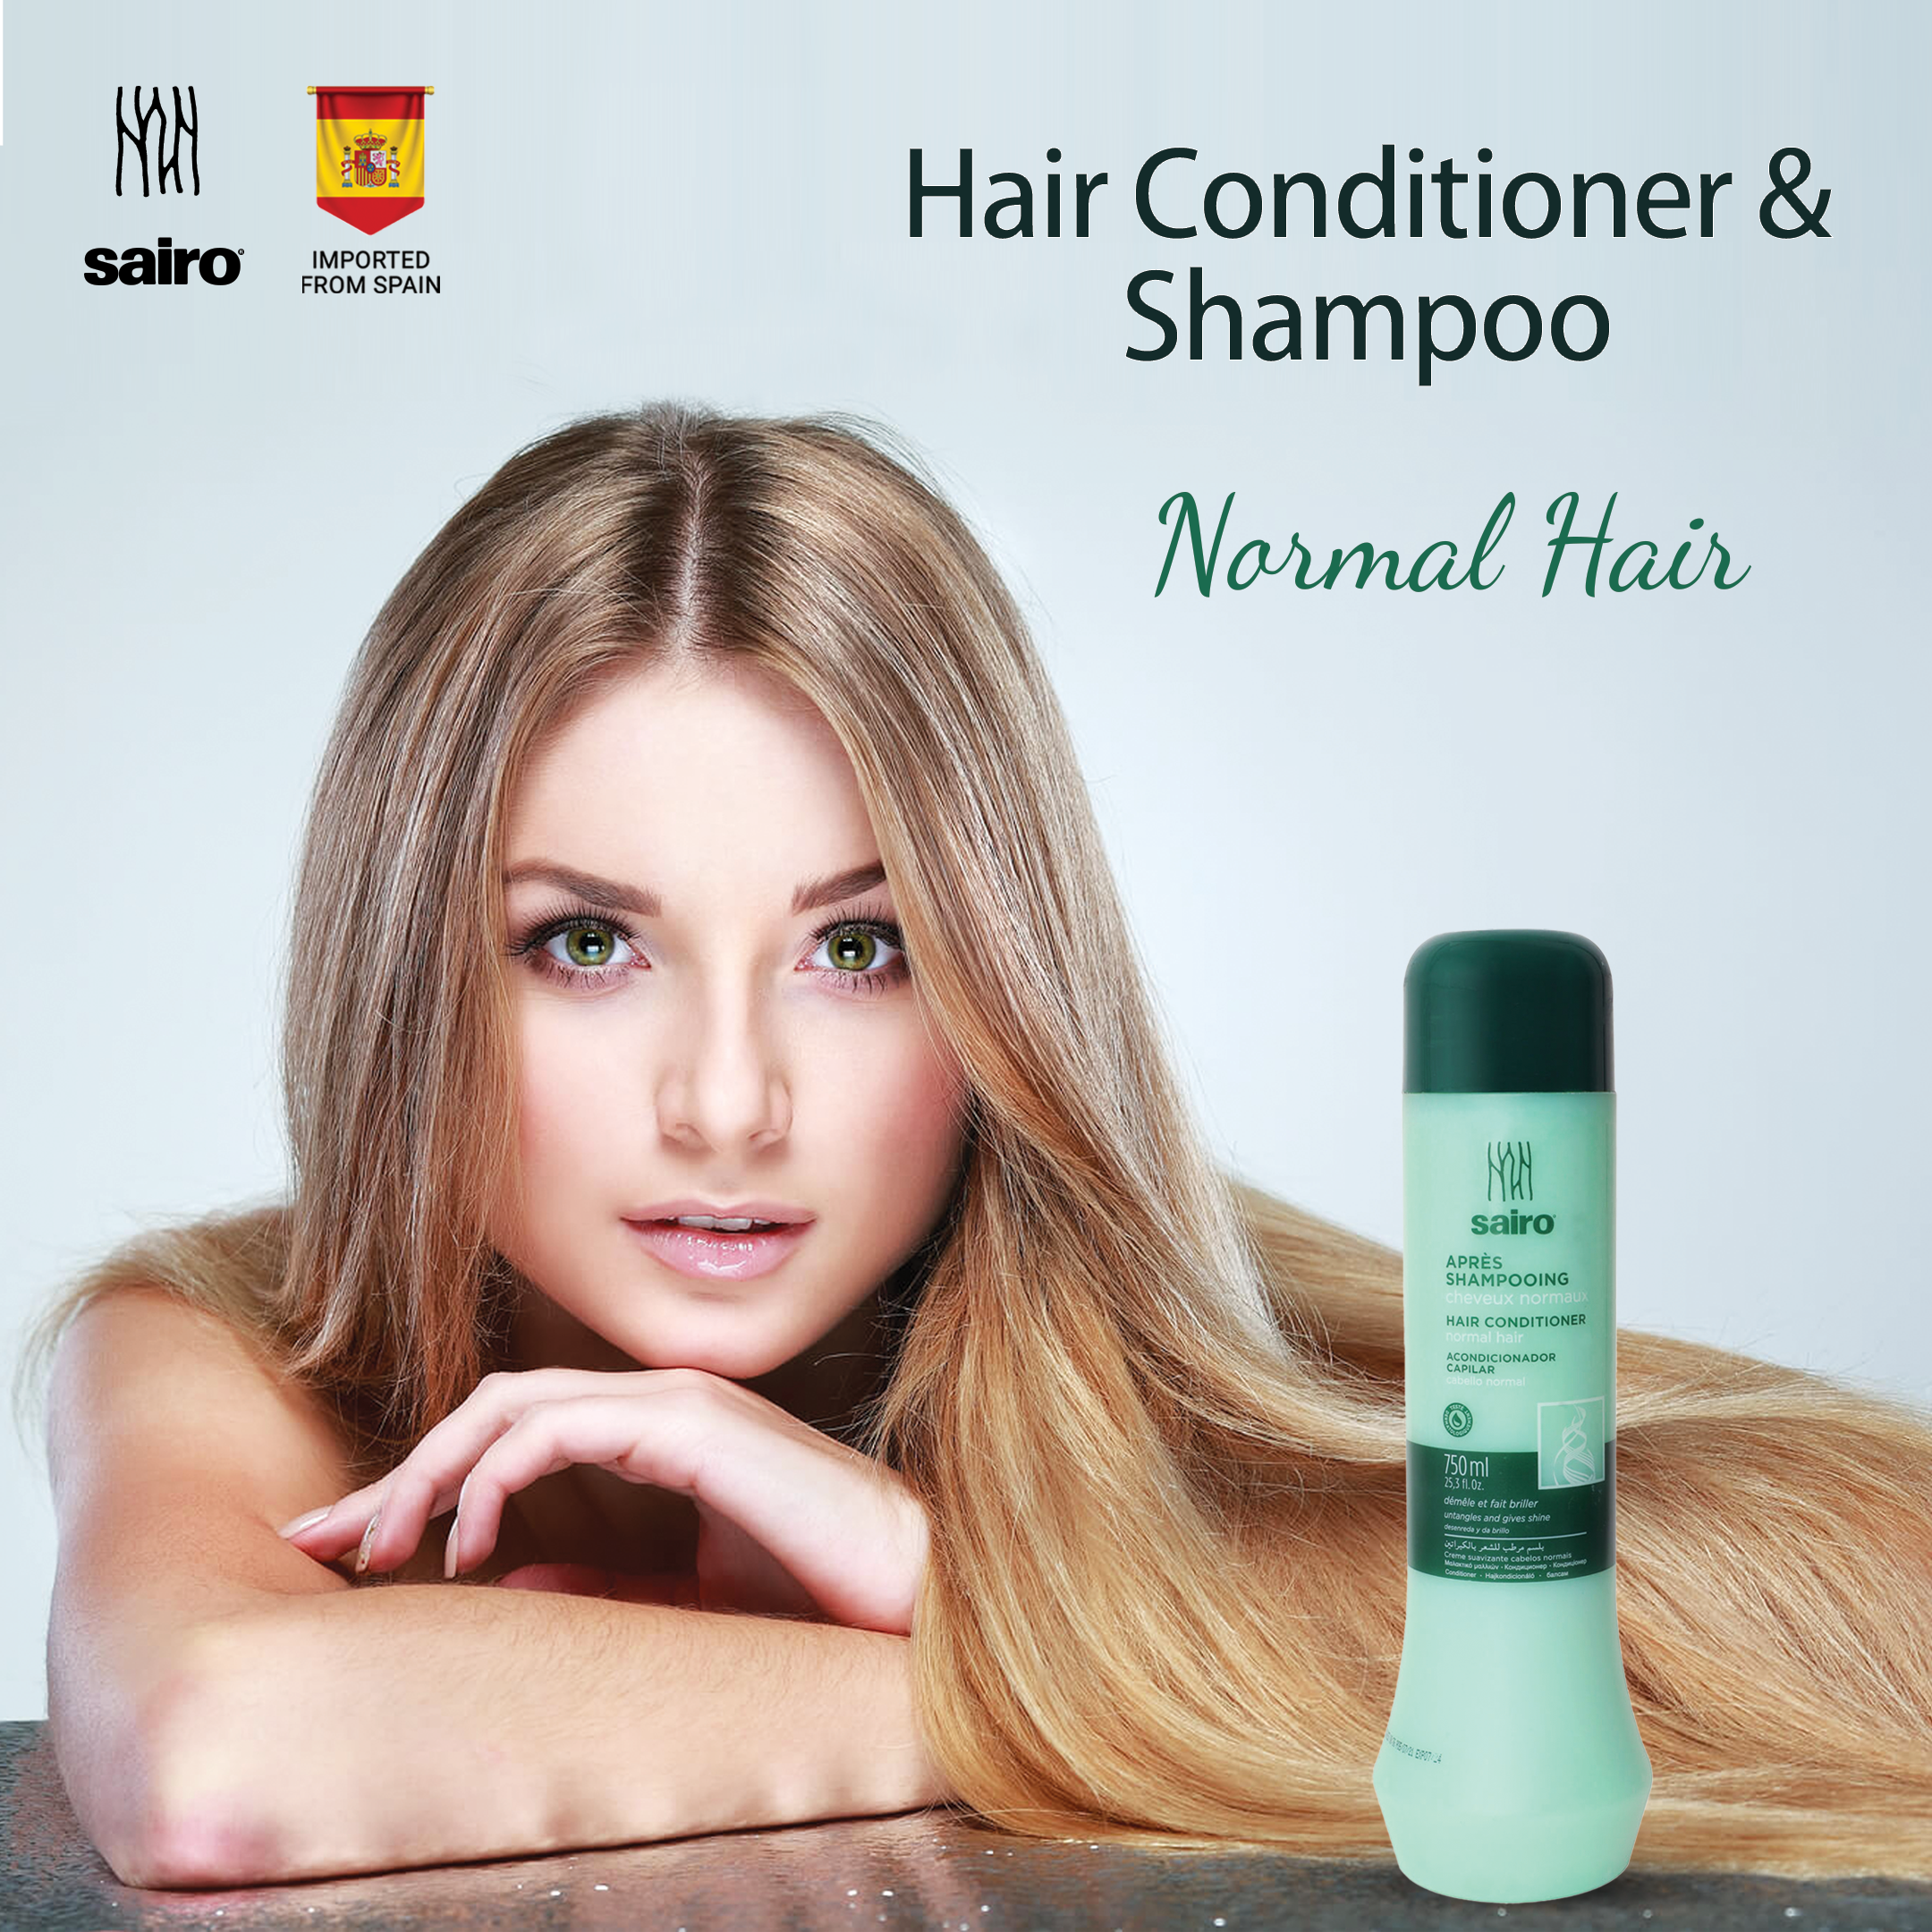 Hair Conditioner for Normal Hair - Sairo